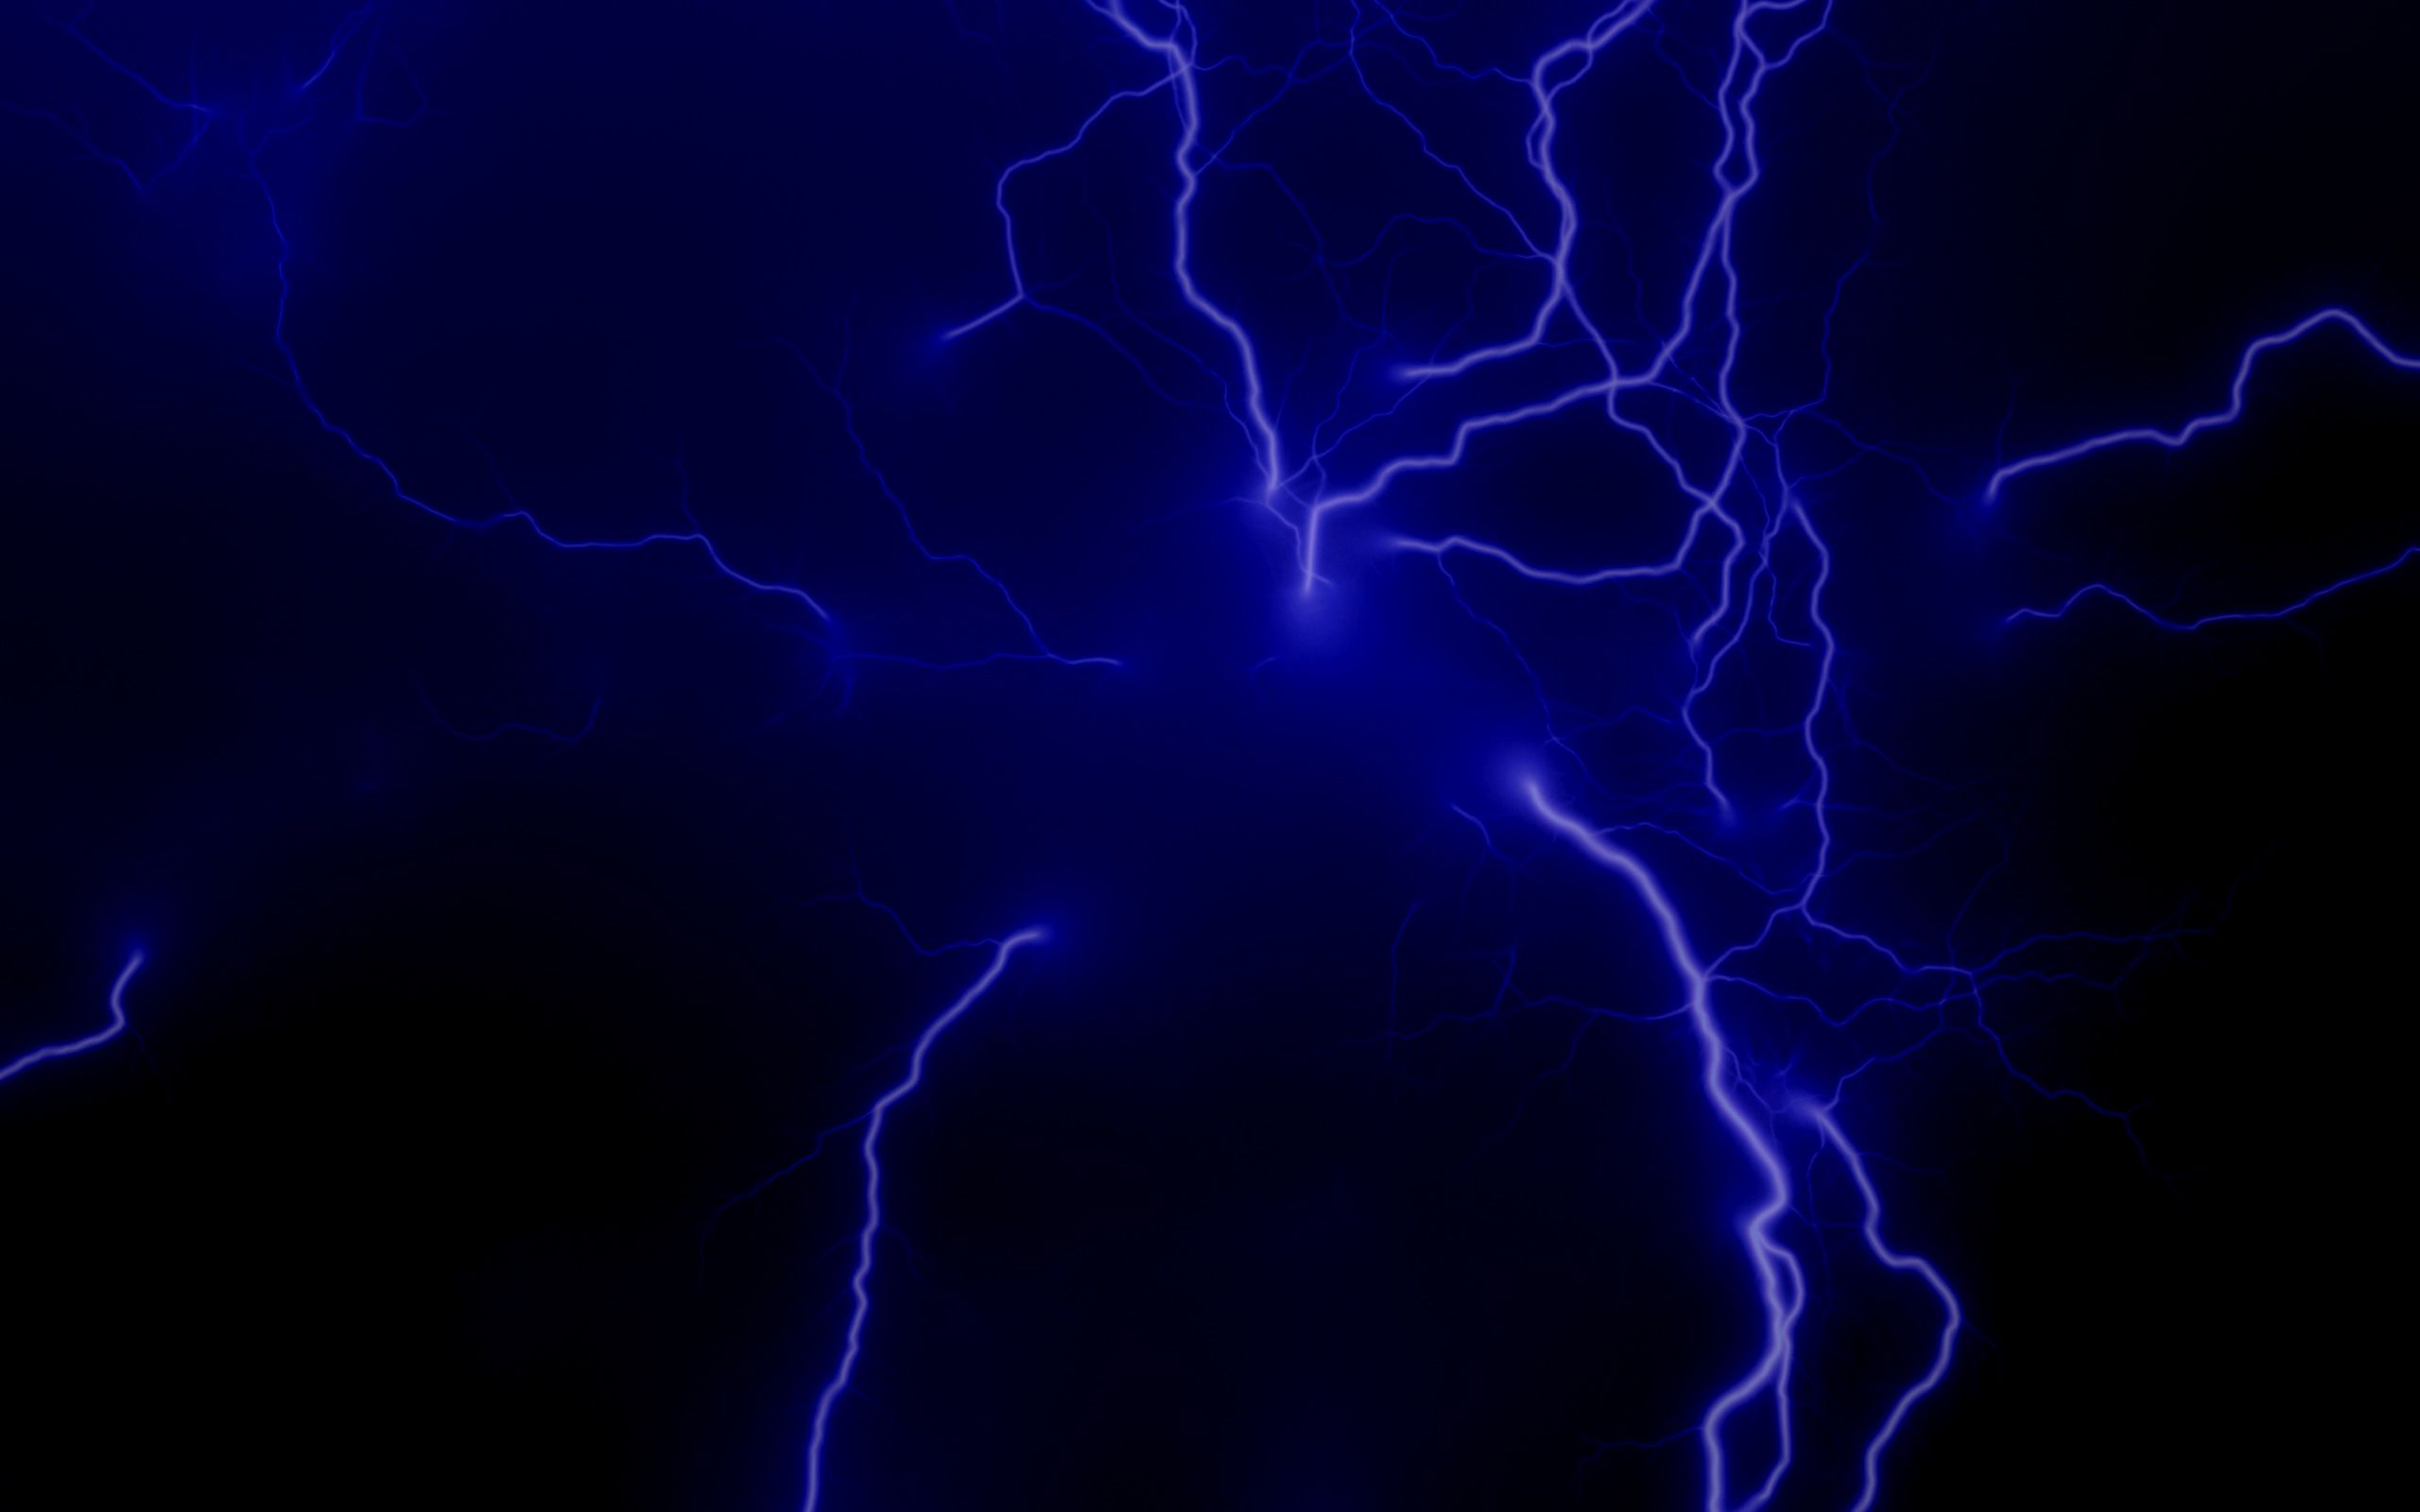 Blue Thunder Wallpapers Wallpaper Cave